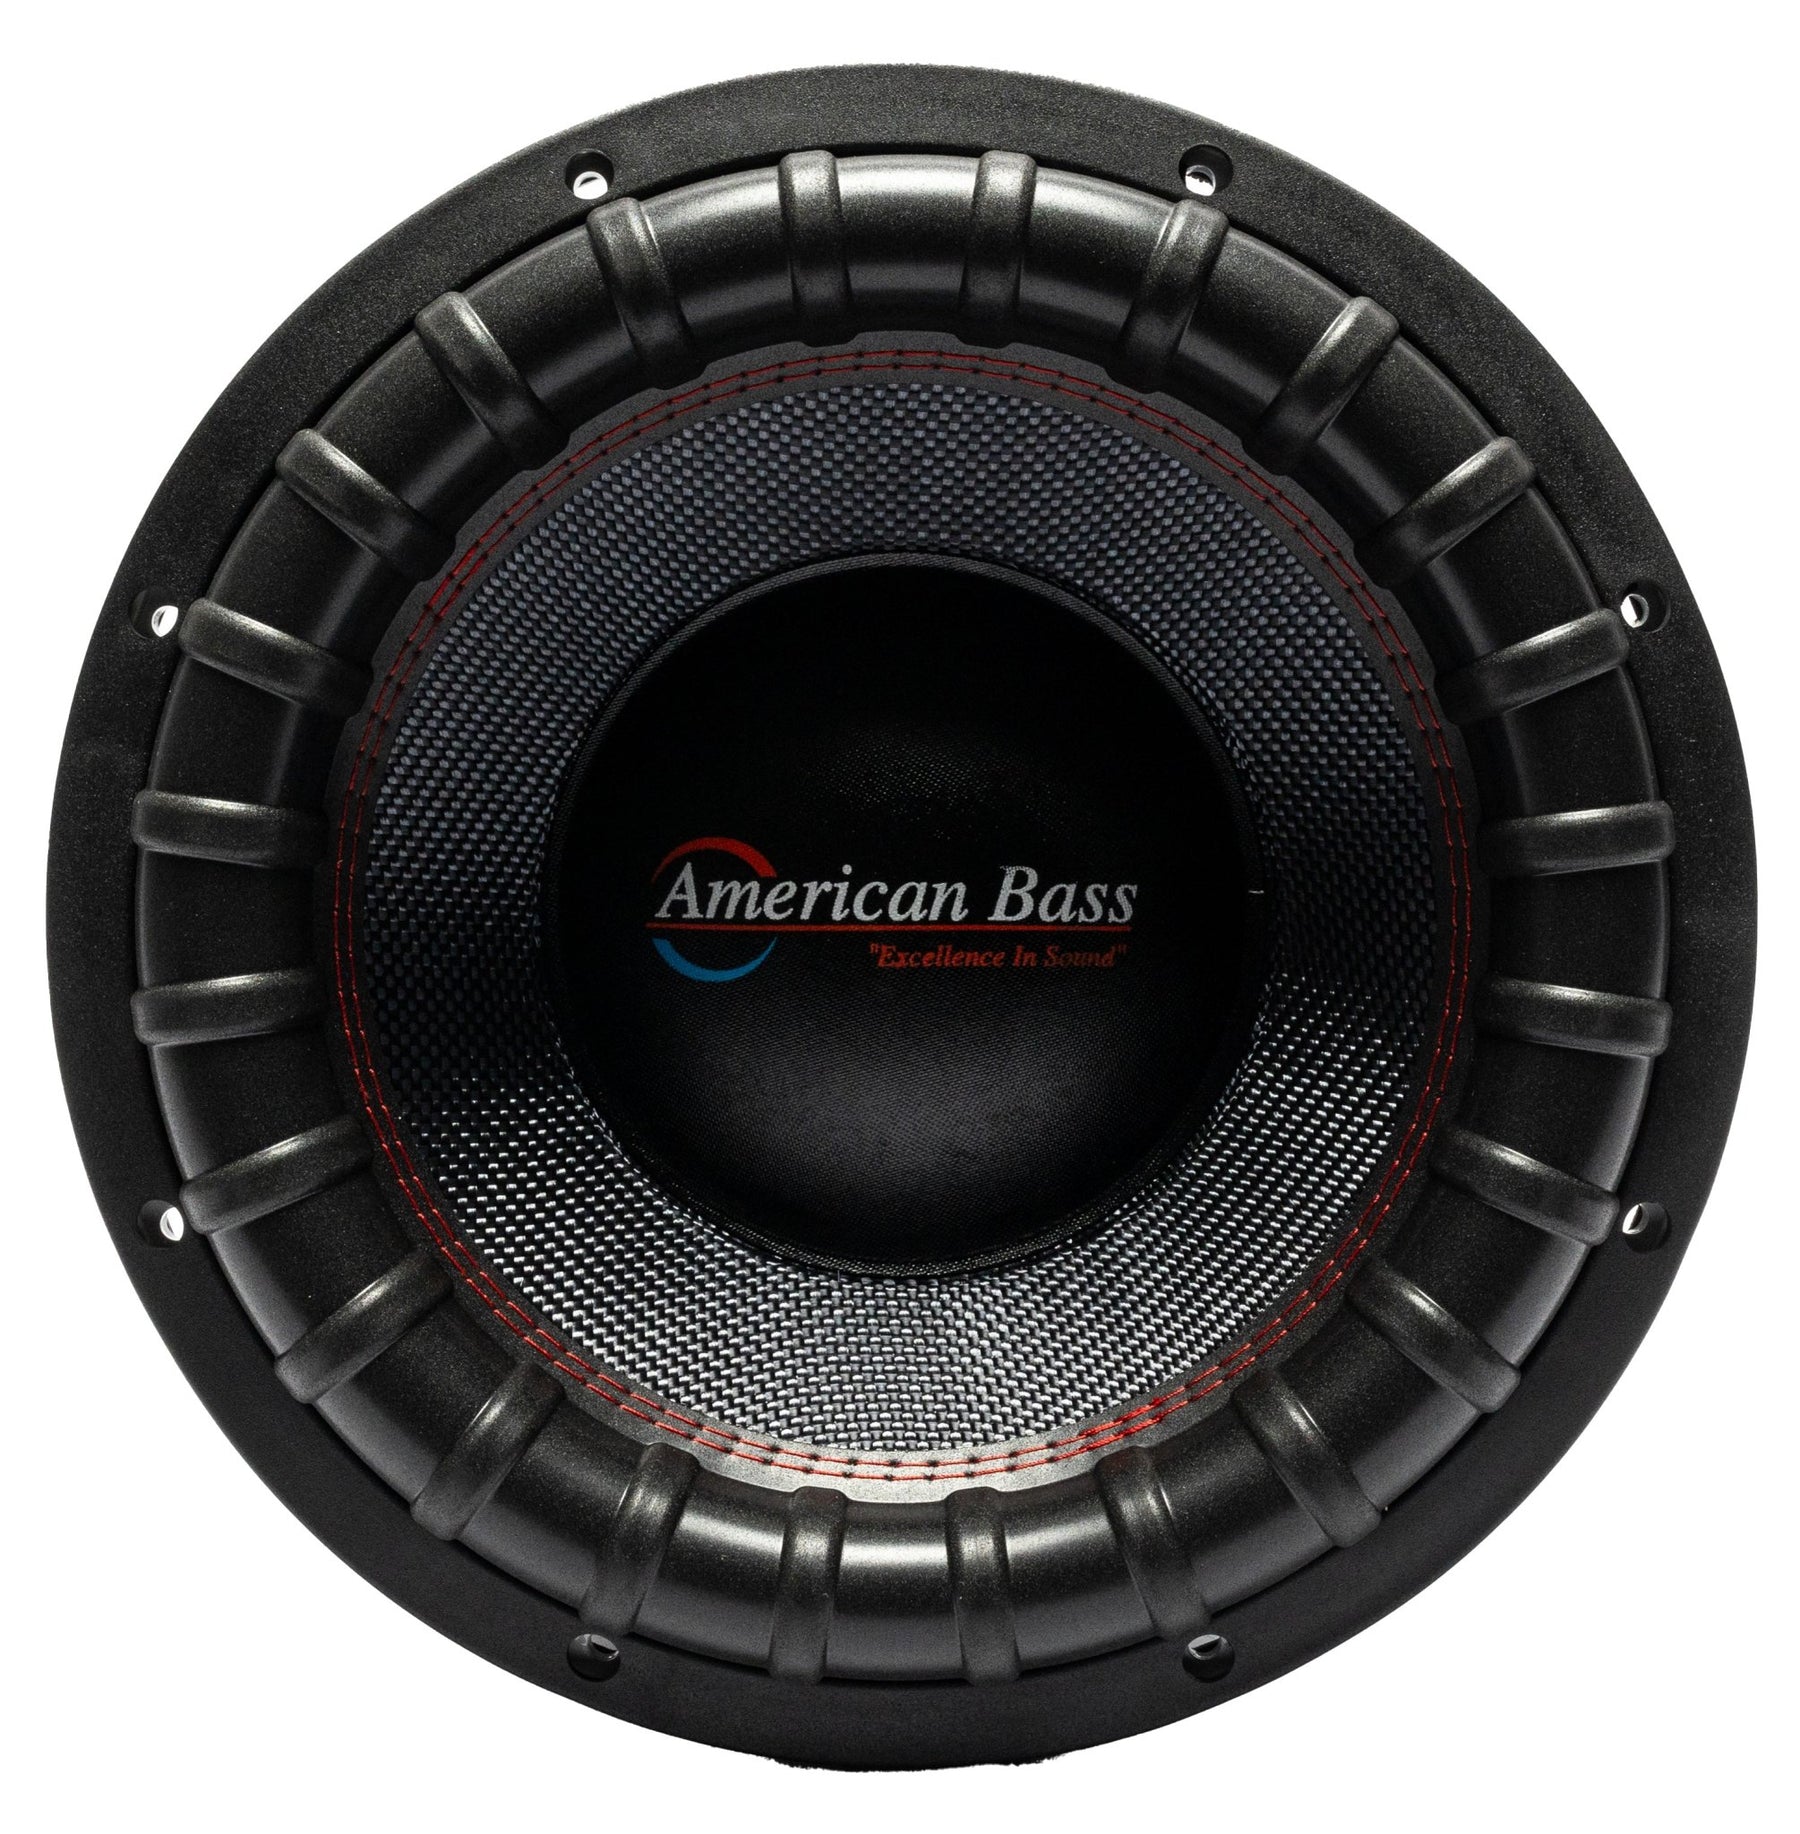 Godfather 12" Subwoofer - American Bass Audio